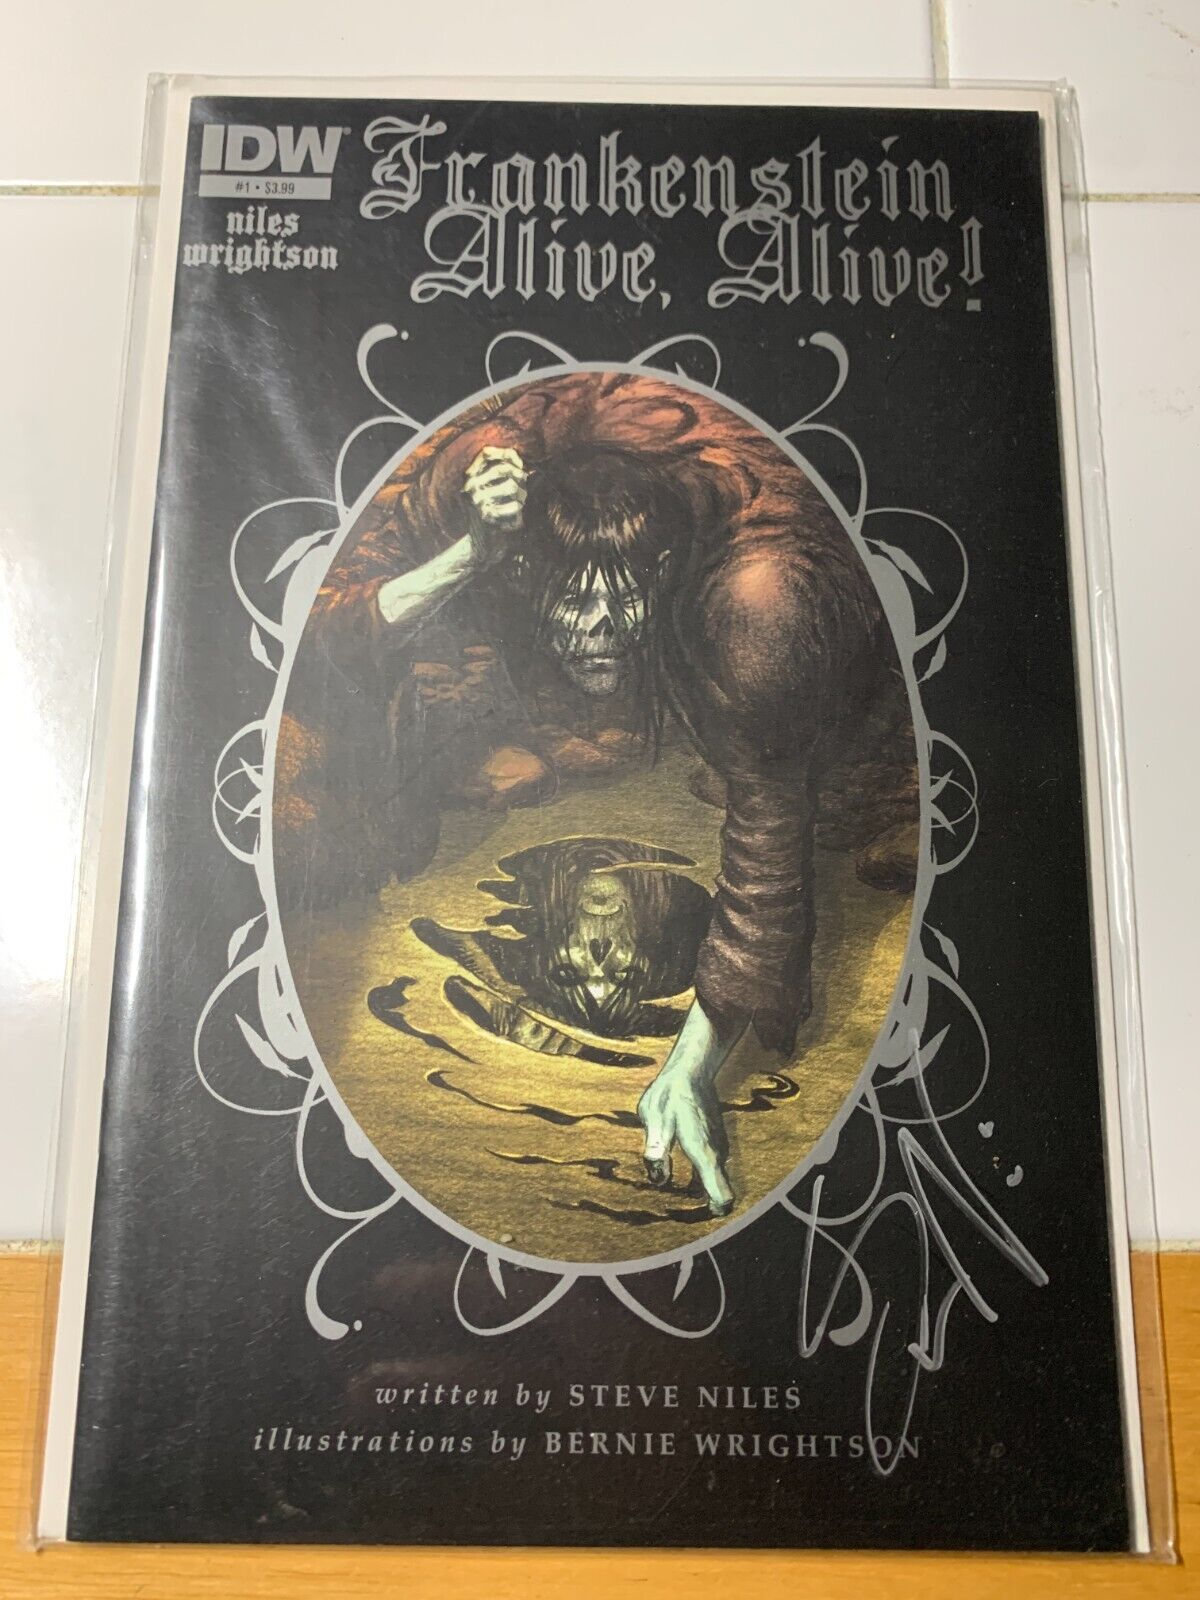 2012 IDW Frankenstein Alive Alive #1 Niles Wrightson Bagged and Boarded HTF